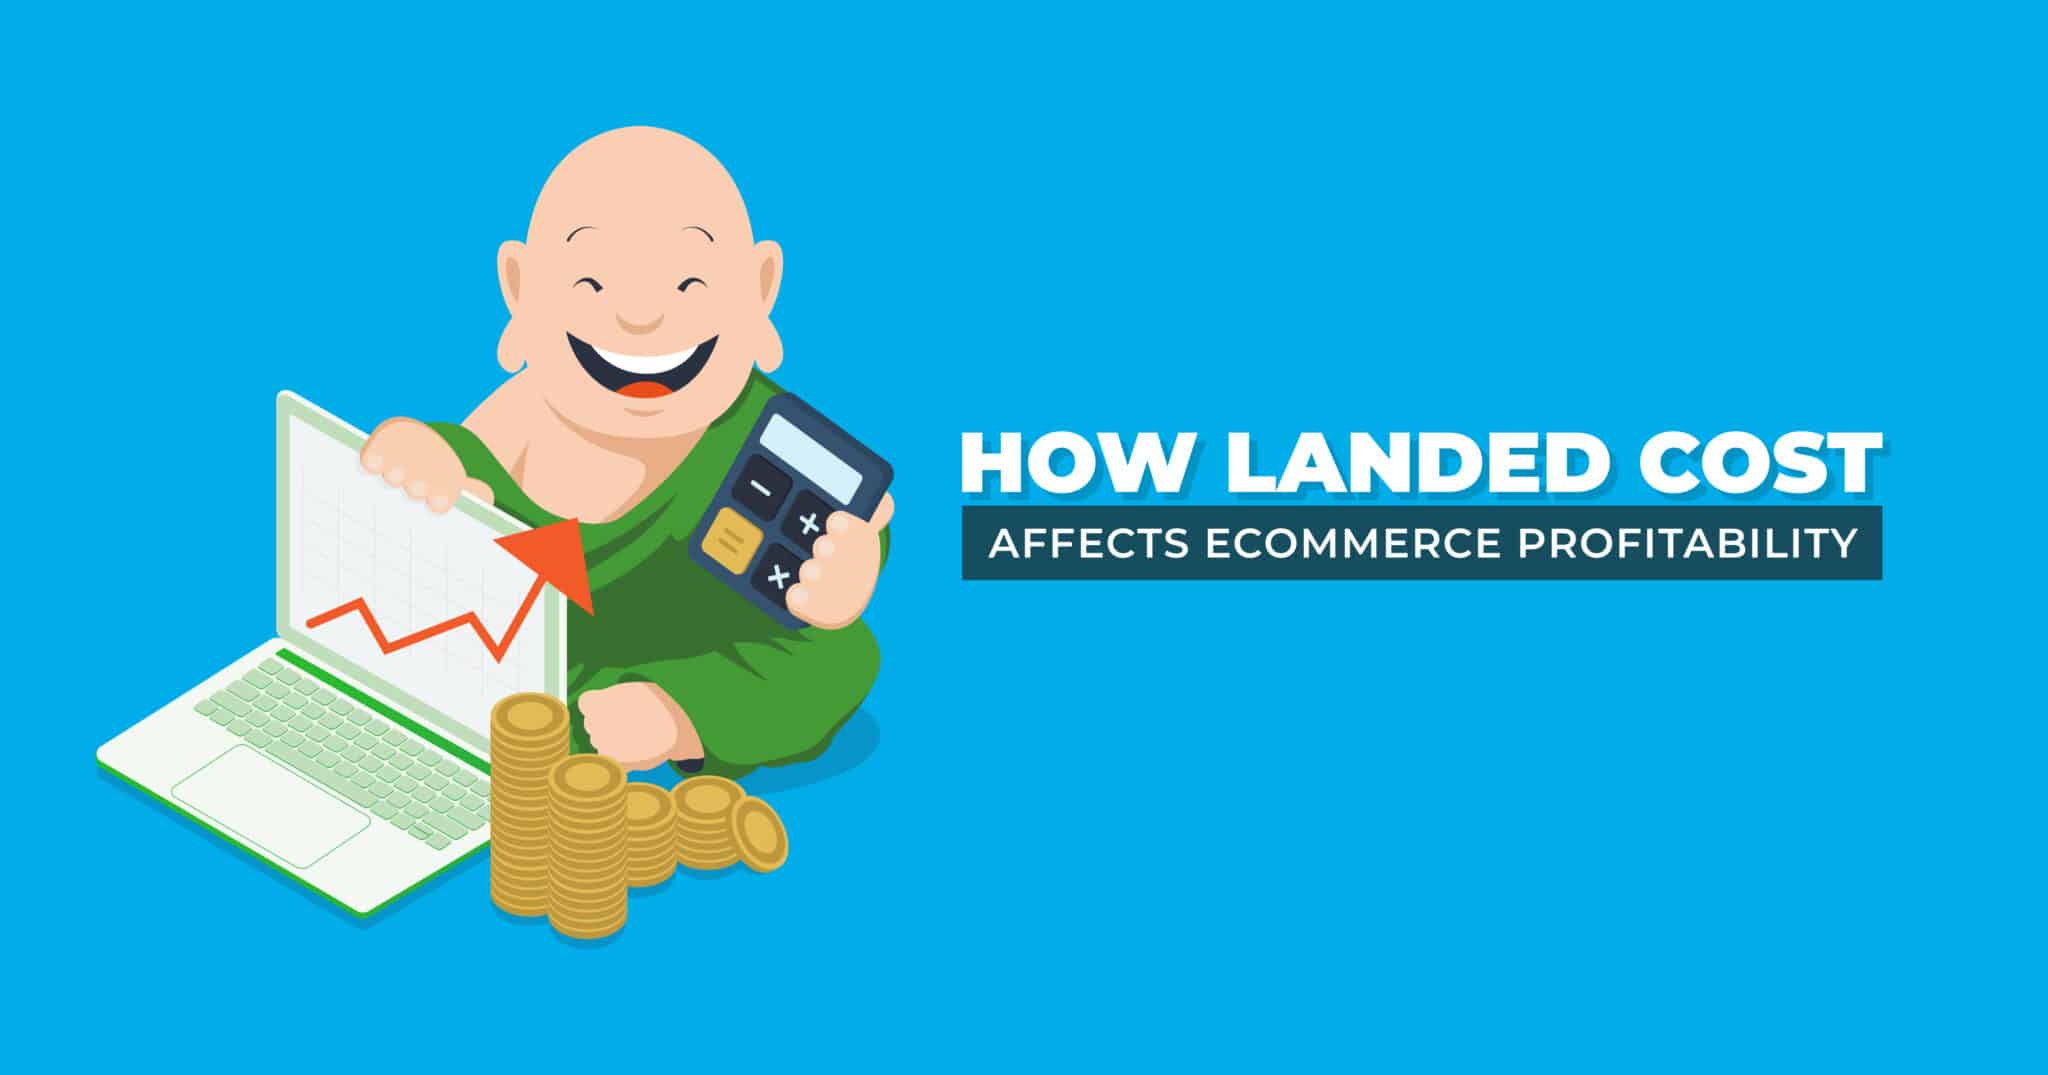 How Landed Cost Affects Ecommerce Profitability